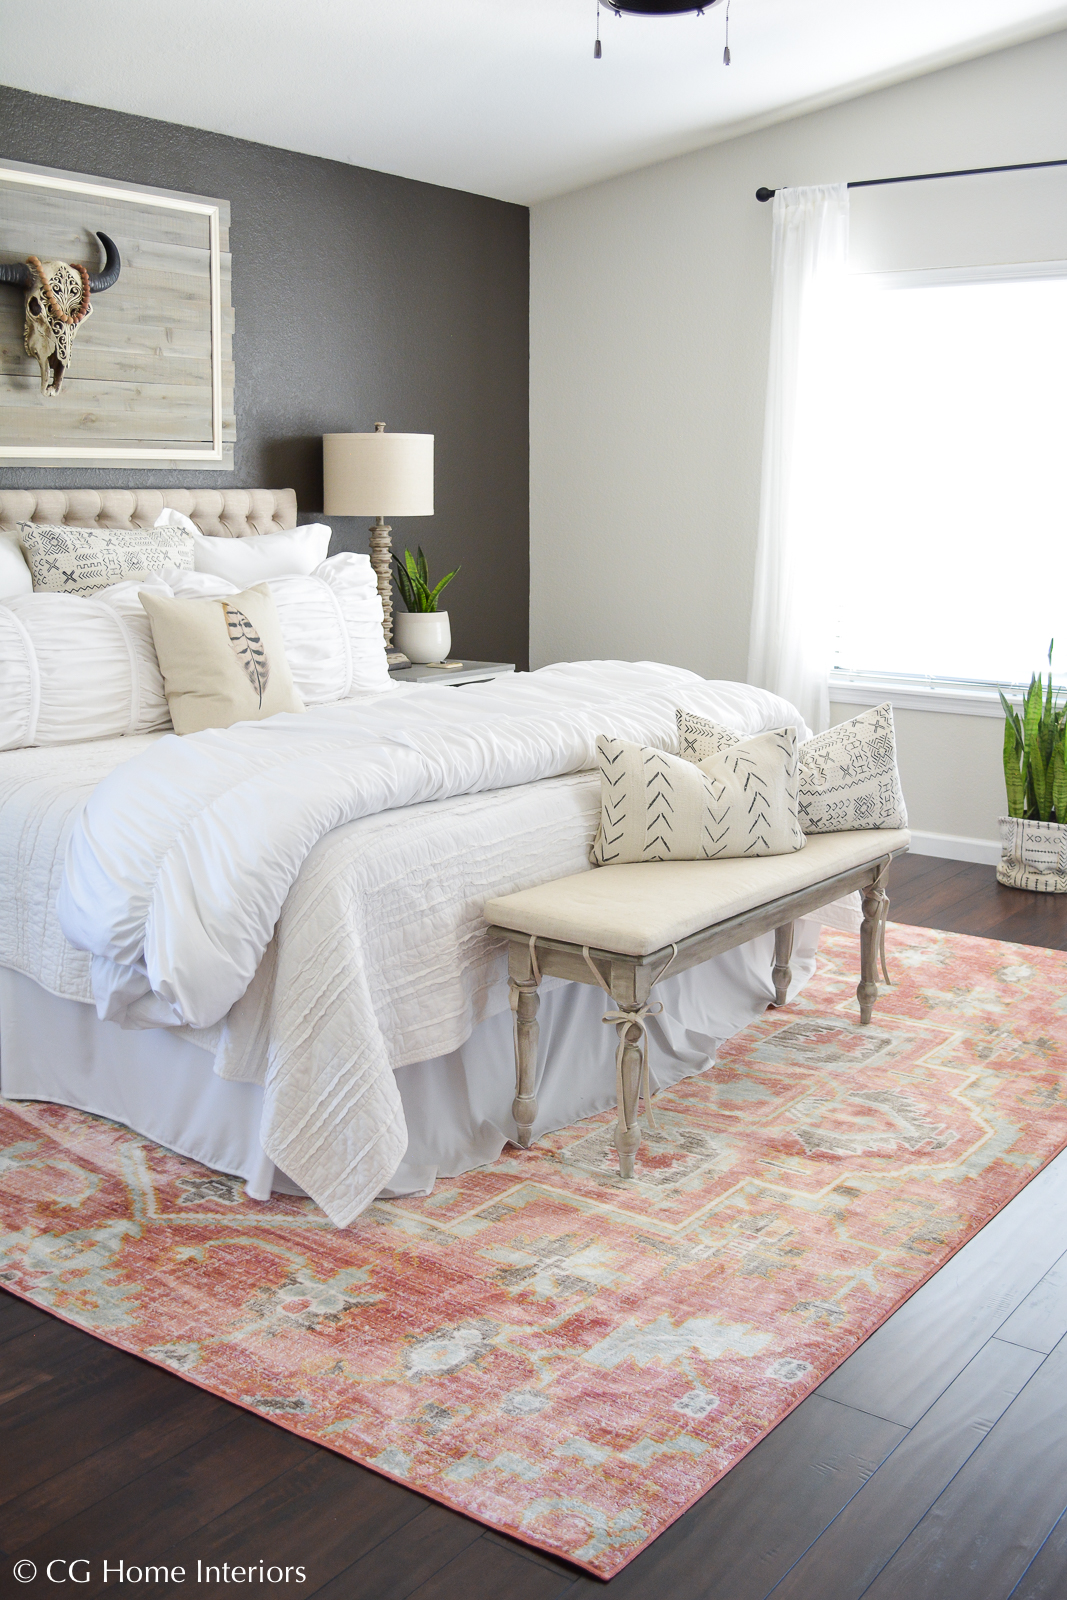 How to keep a tidy home, make the bed